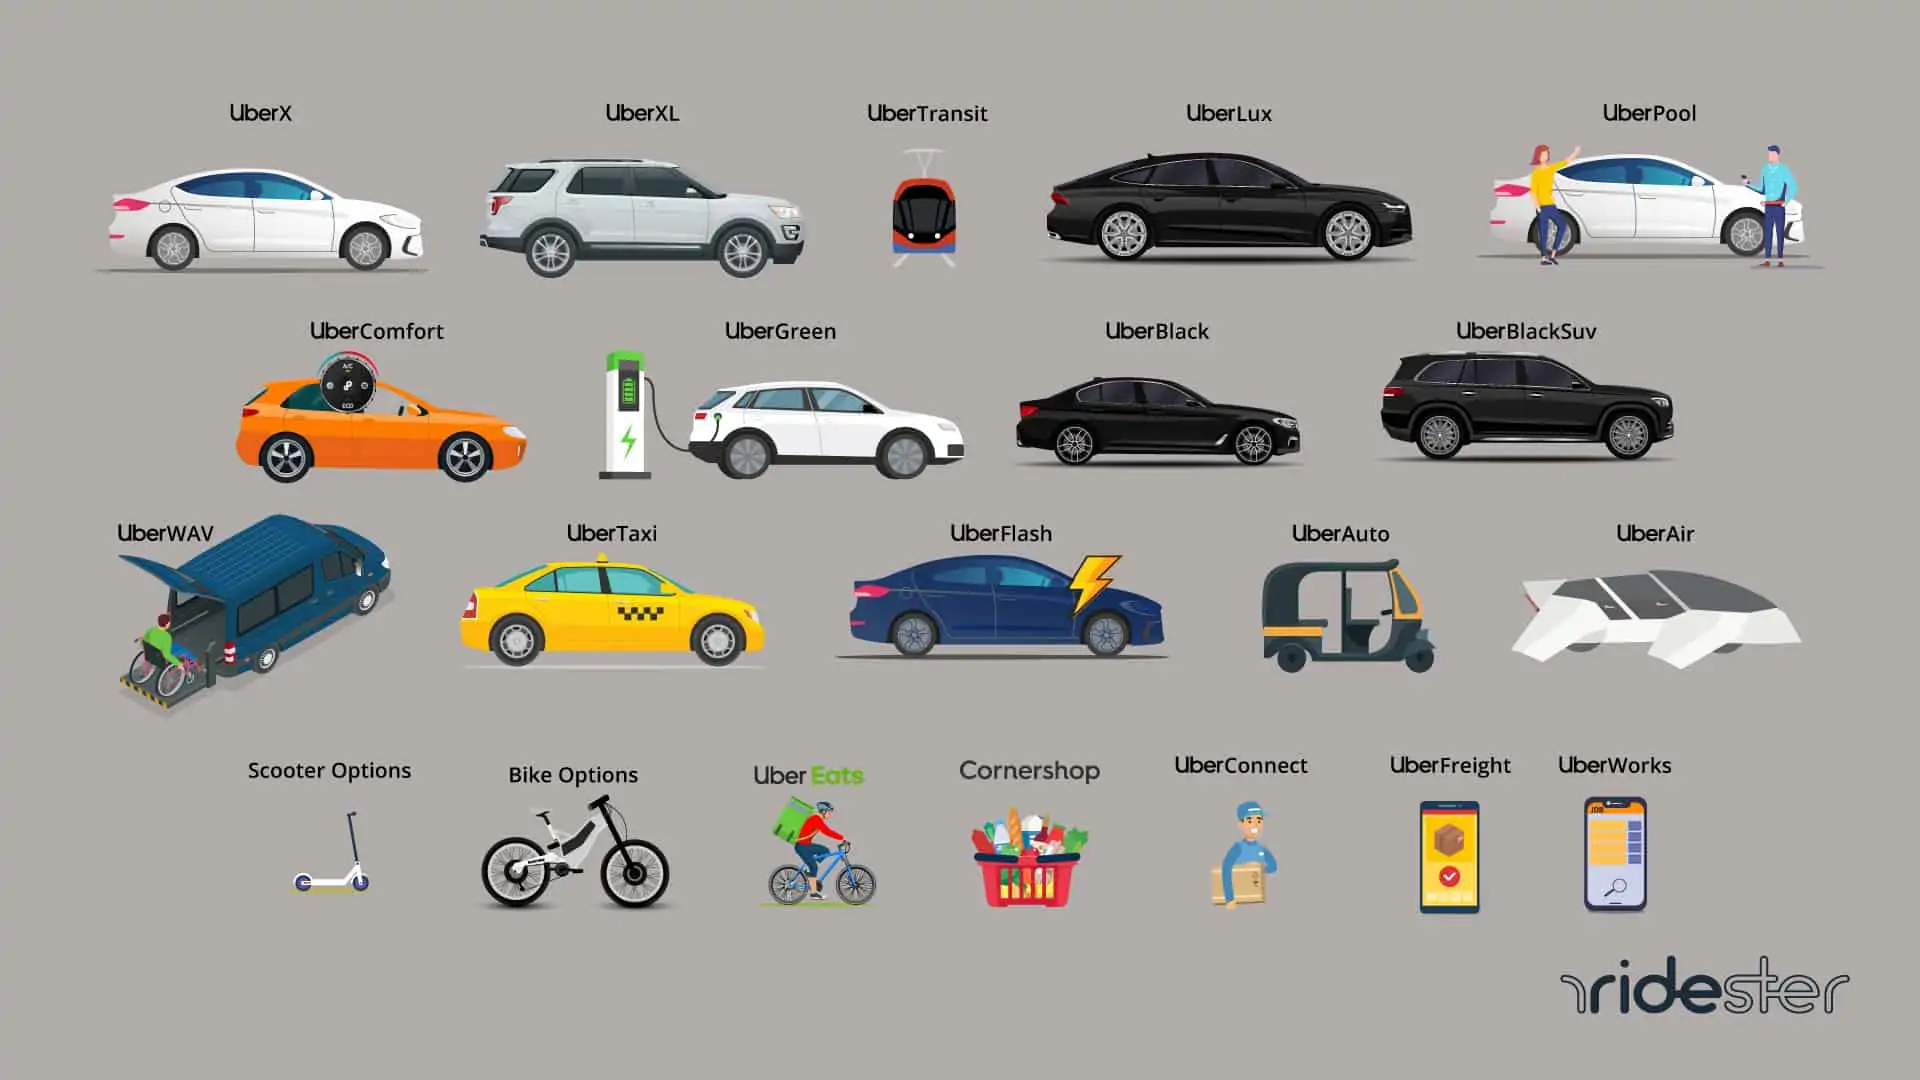 vector image showing all the different uber services the company has to offer